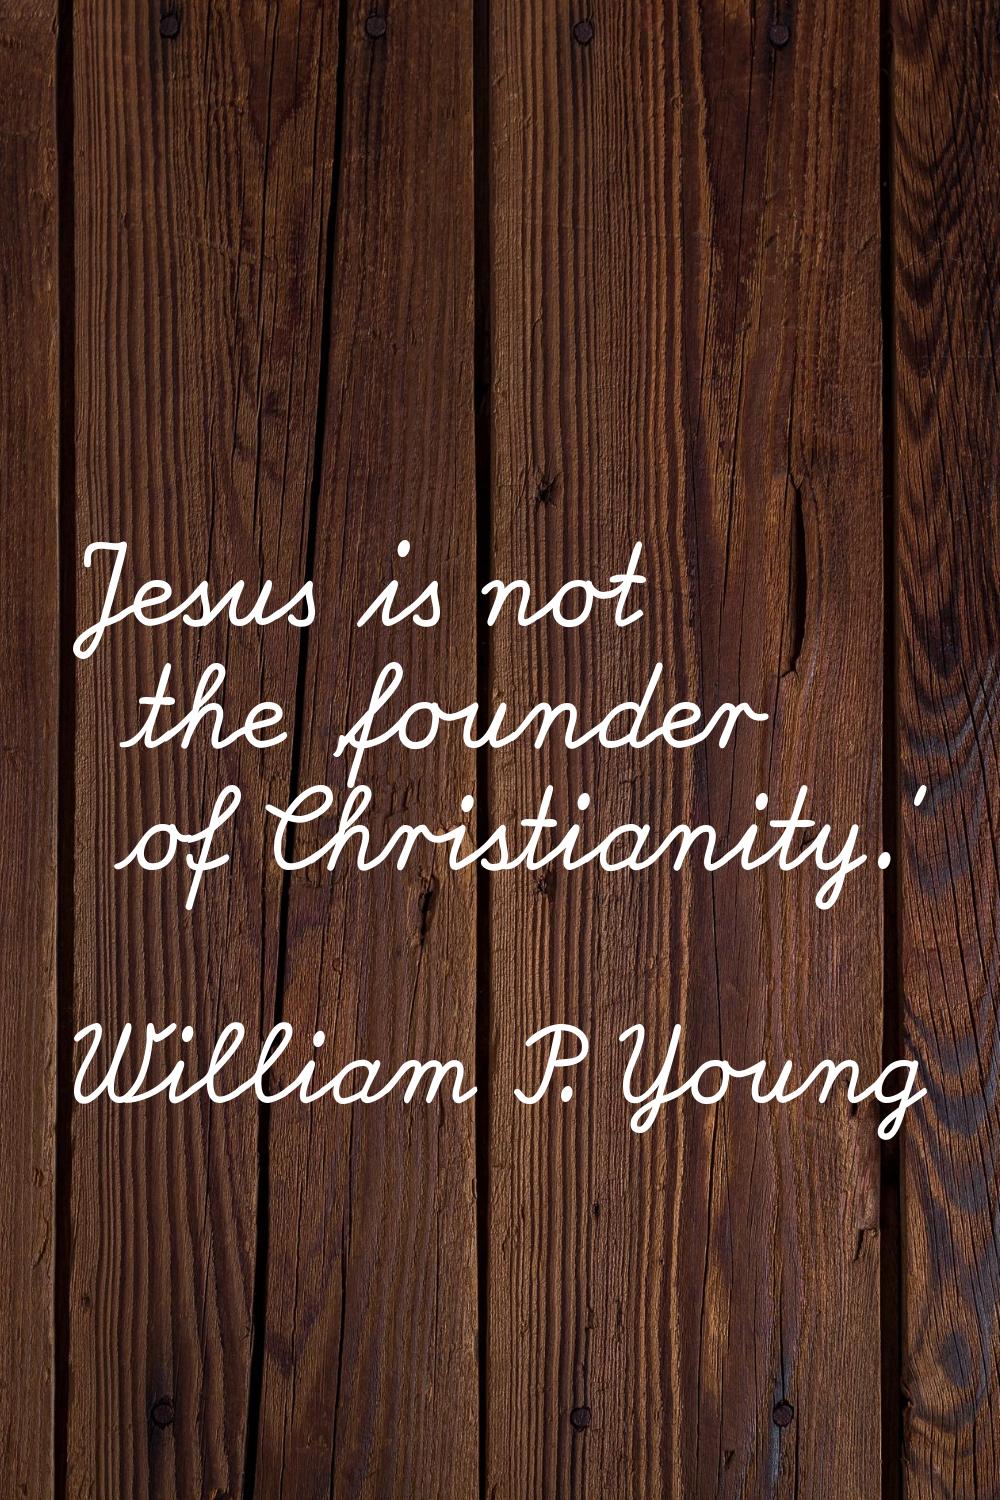 Jesus is not the 'founder of Christianity.'